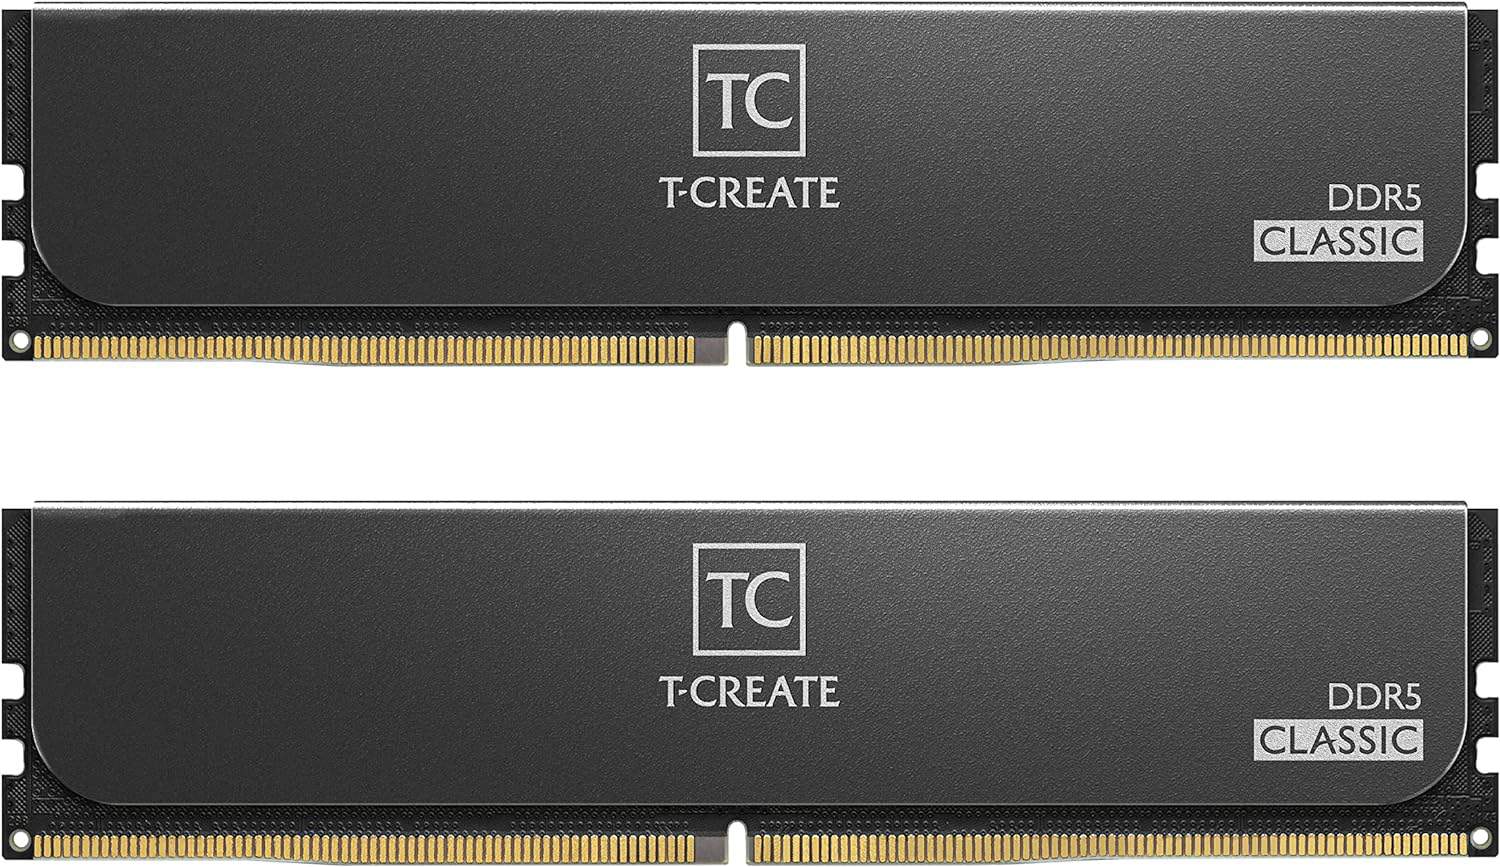 Two TEAMGROUP T-Create Classic DDR5 32GB Kit ram modules side by side.